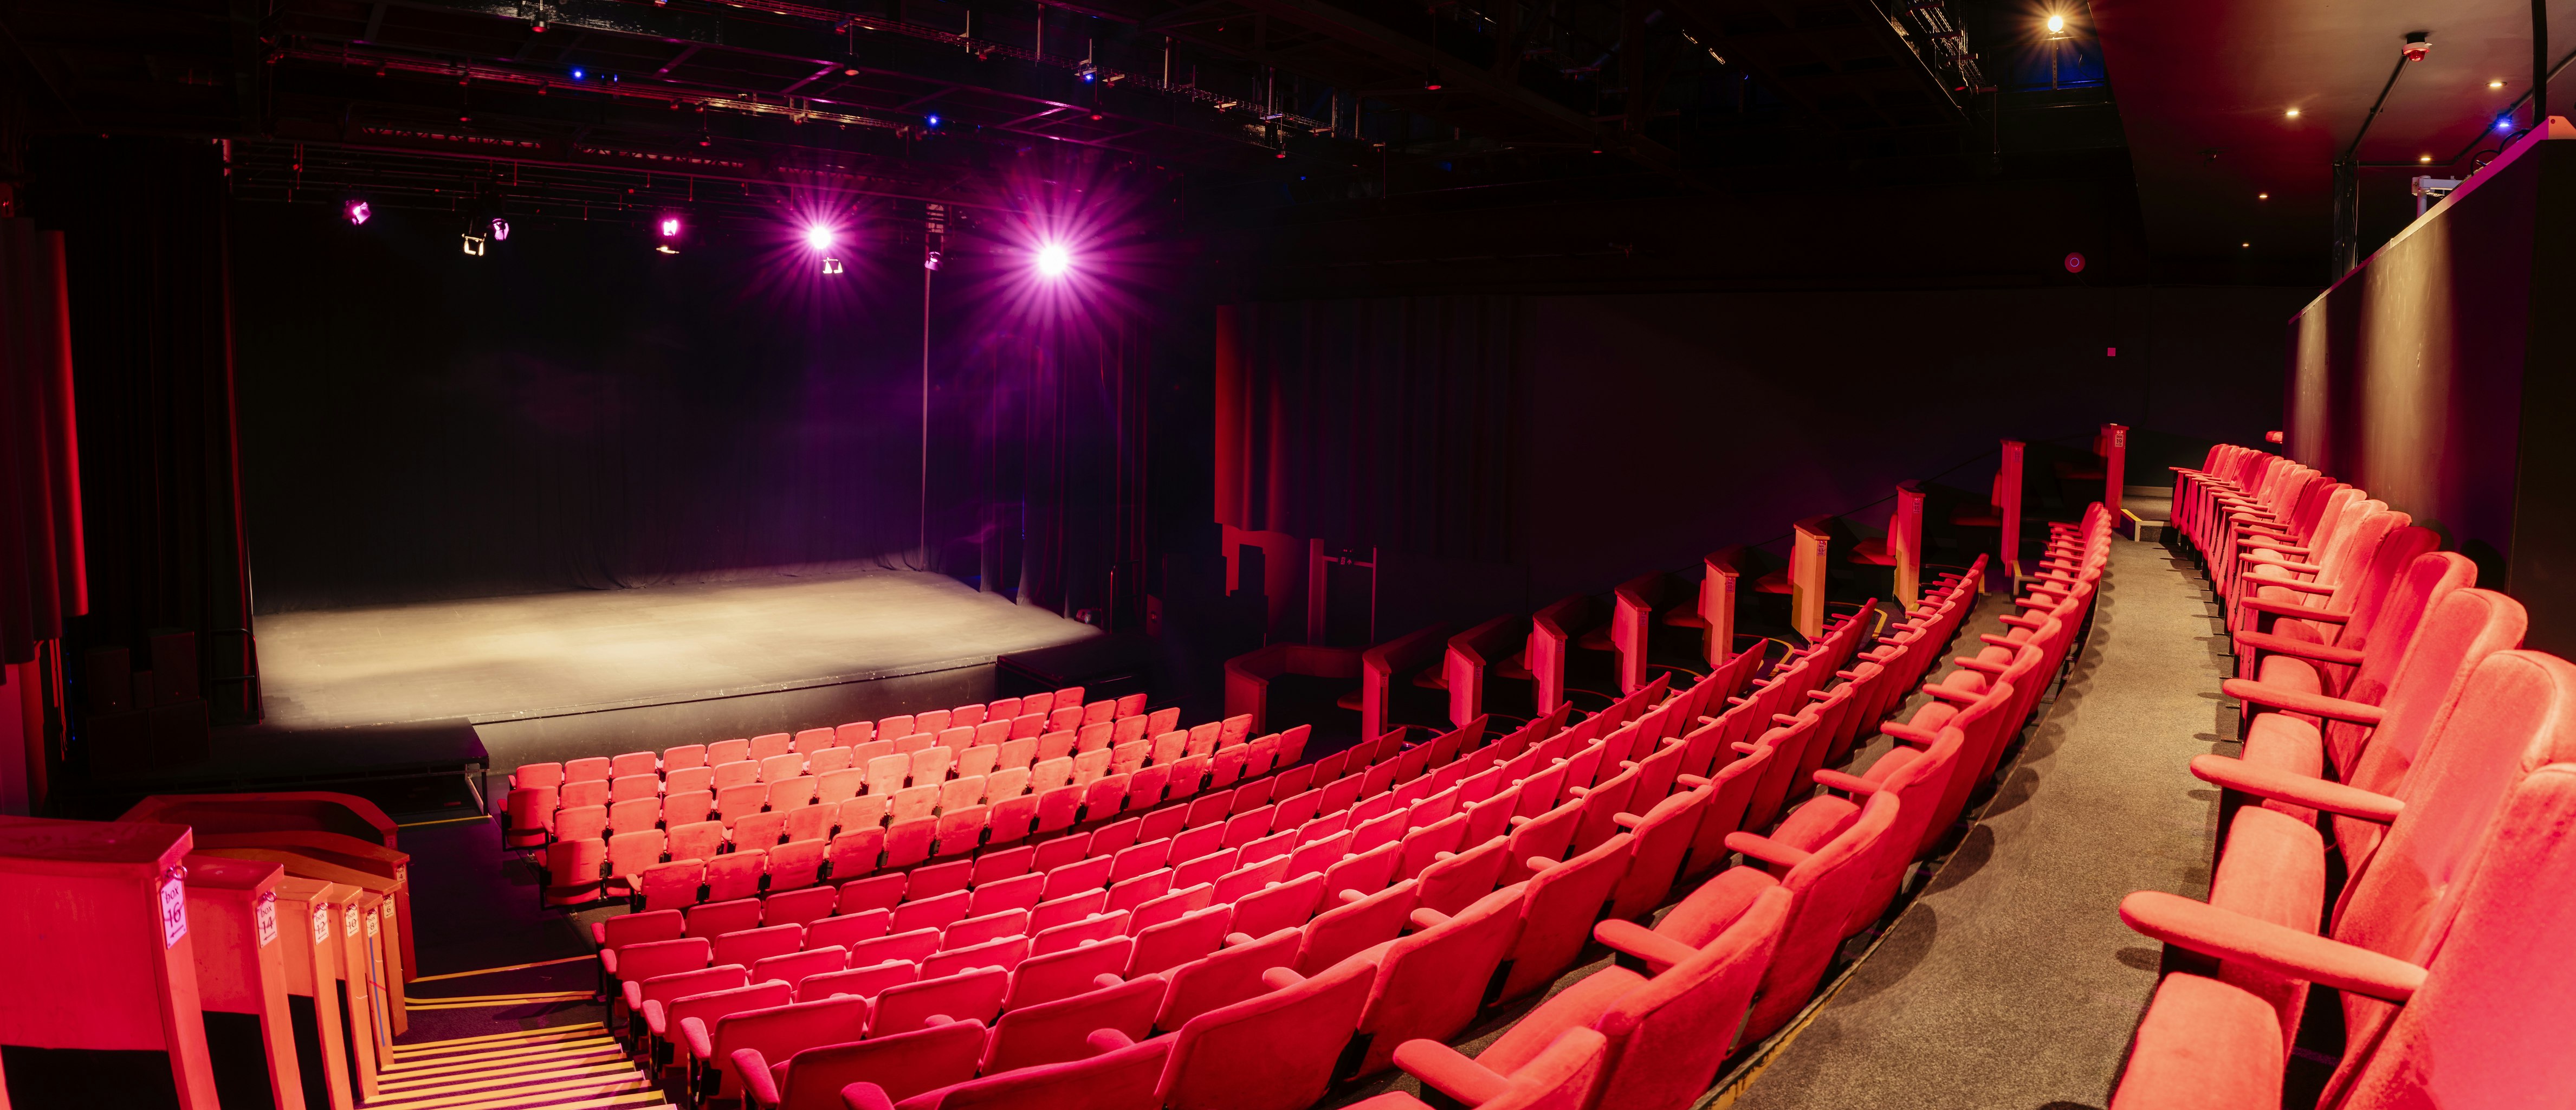 Creative Spaces Venues in Manchester - Contact Theatre